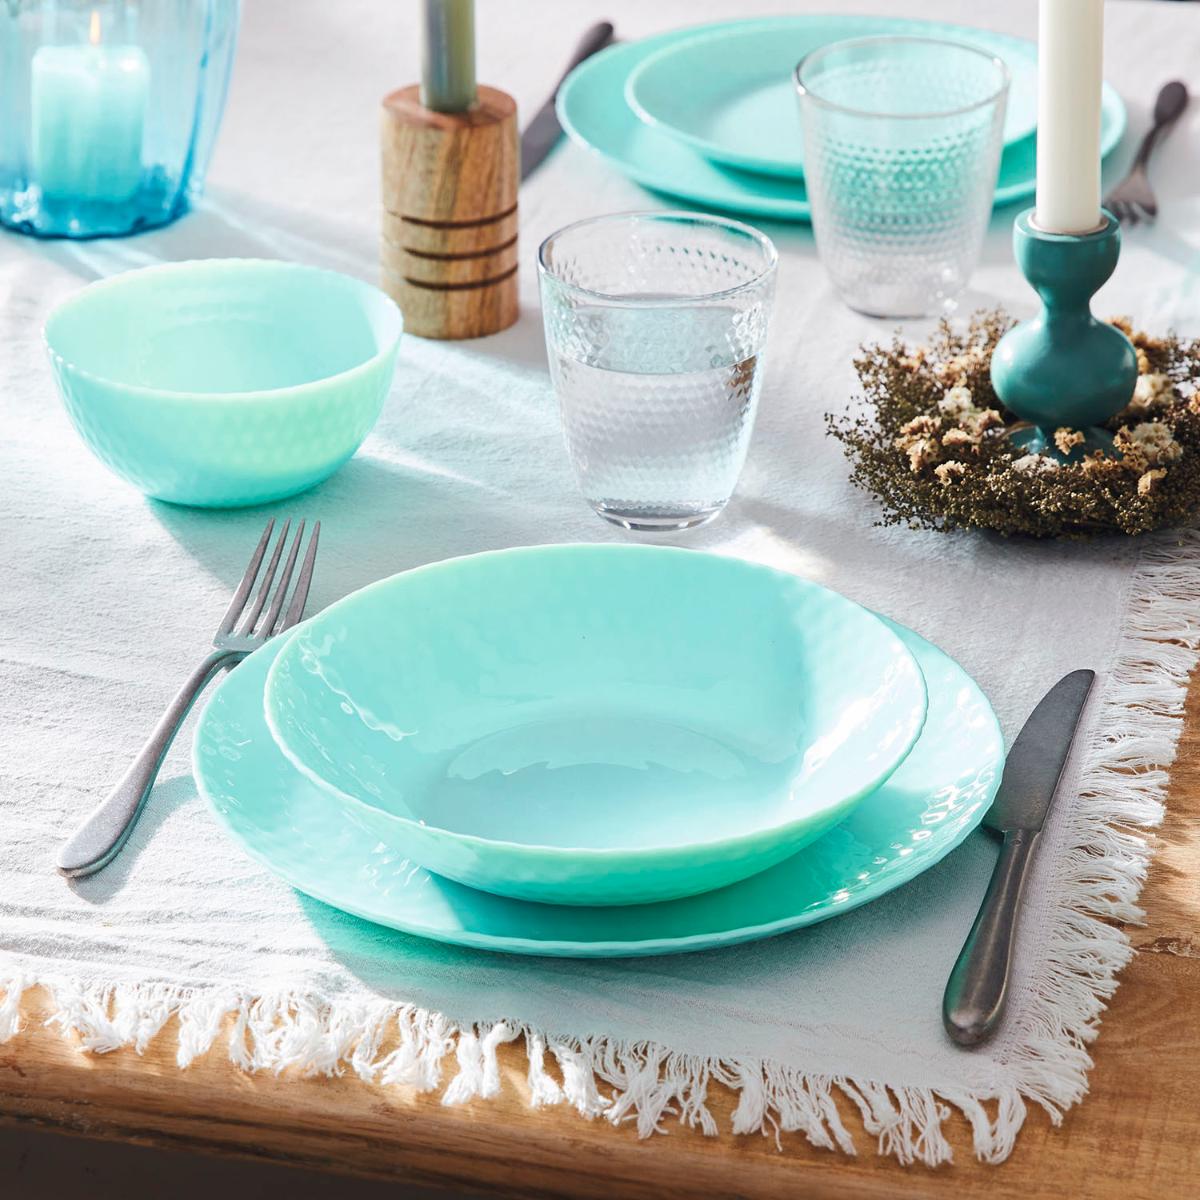 OPAL DINNER SET, Luminarc, Brands, Common, Products